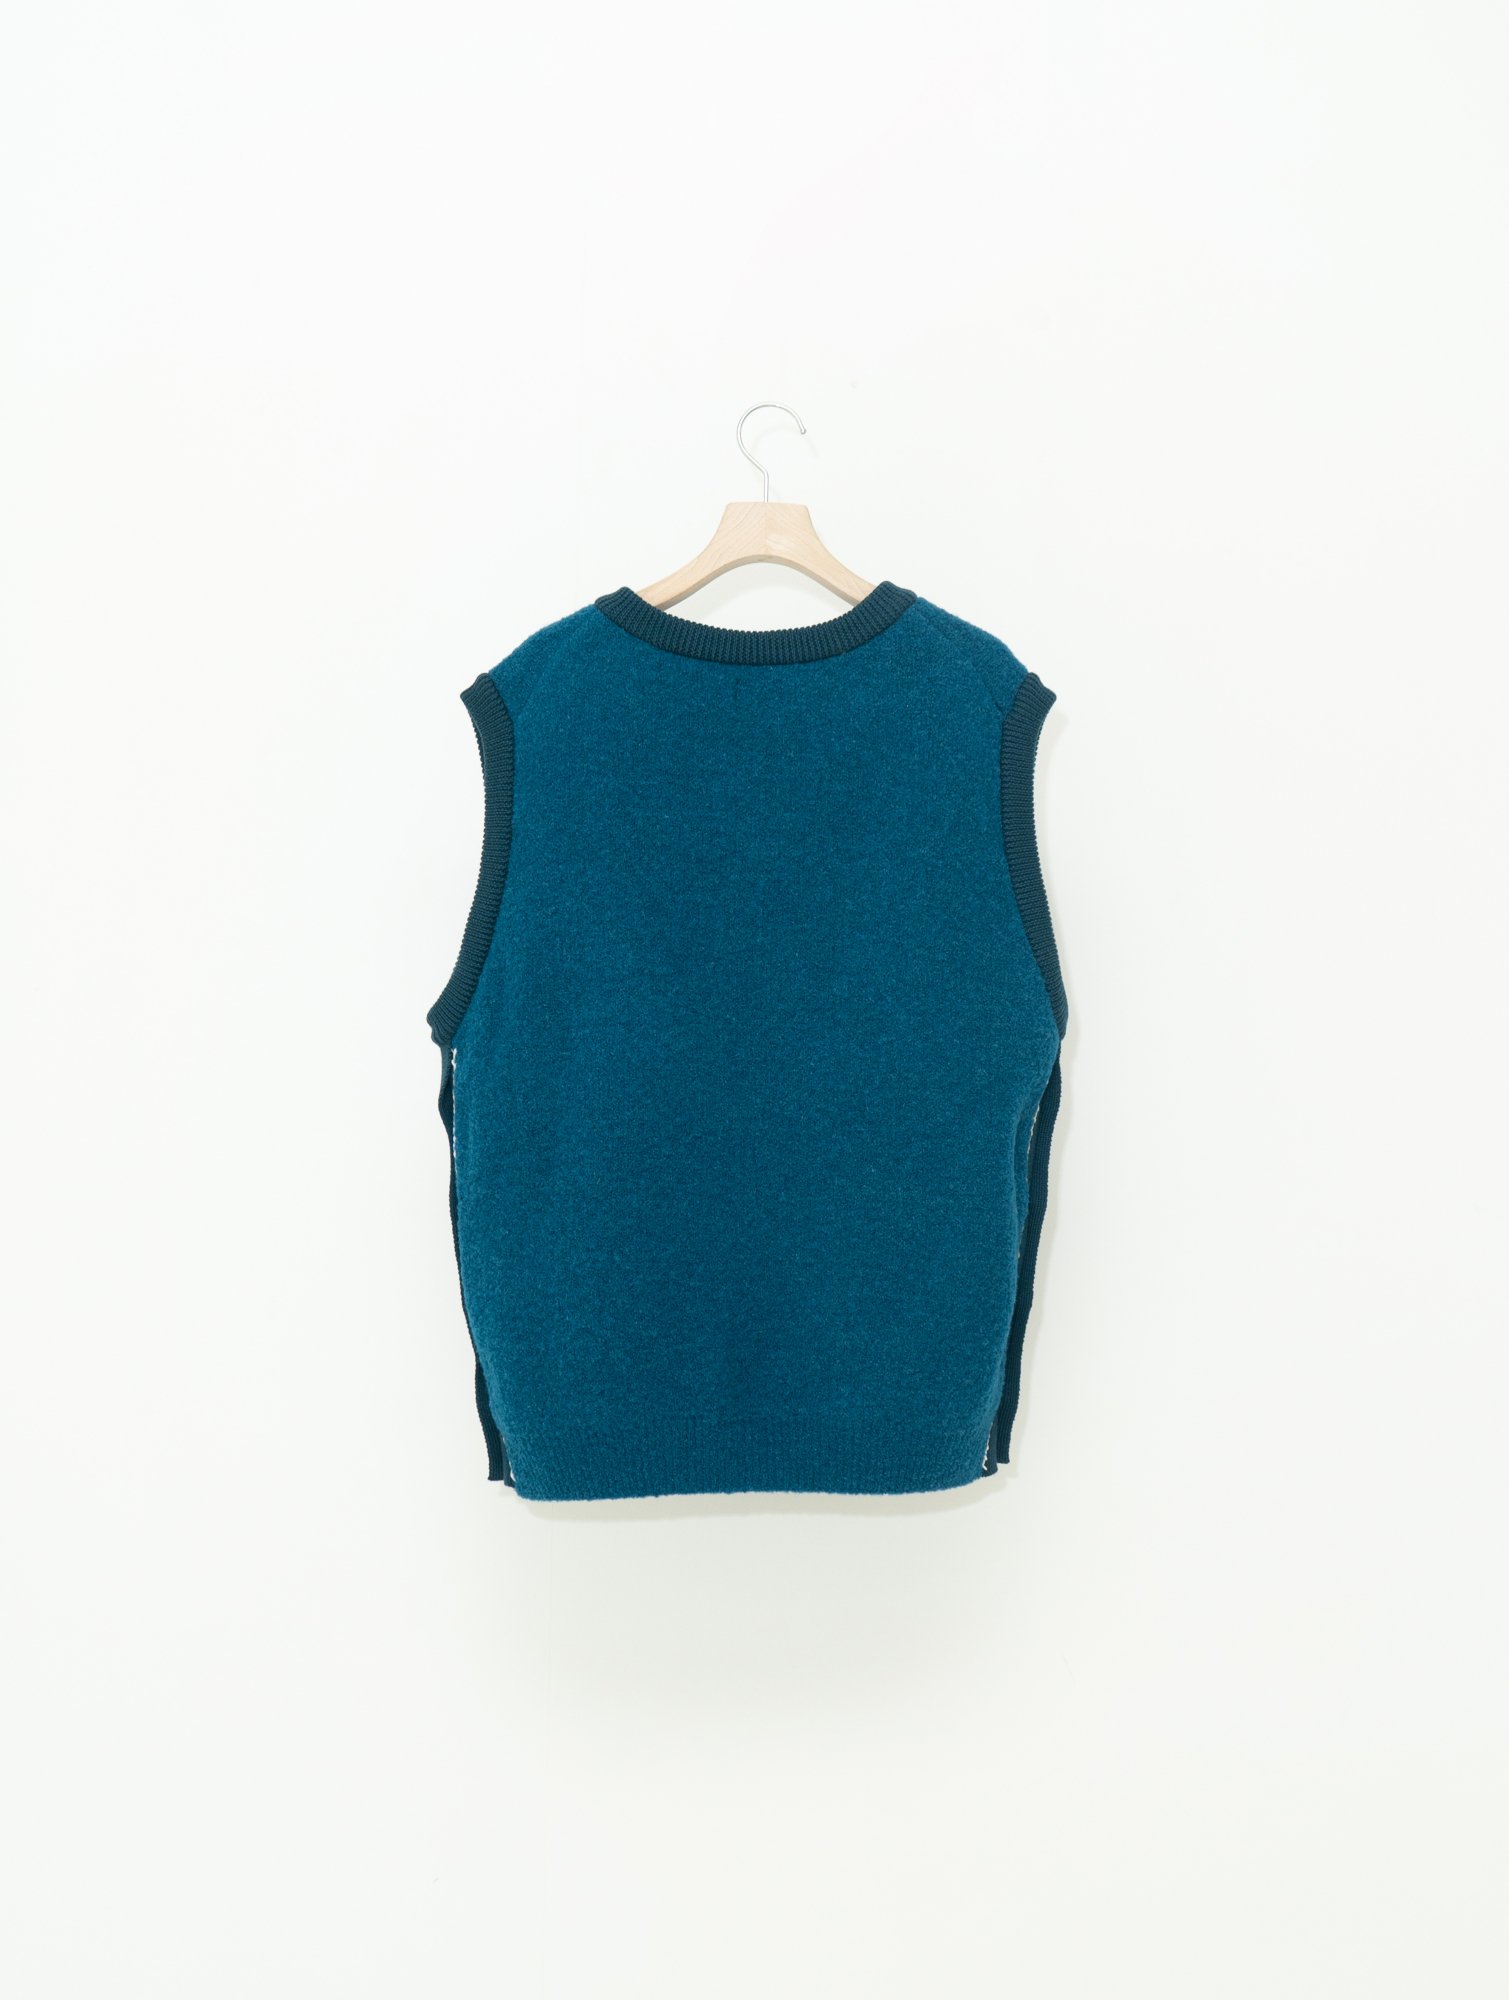 ALLEGE<br />Boucle Knit Vest / GREEN<img class='new_mark_img2' src='https://img.shop-pro.jp/img/new/icons14.gif' style='border:none;display:inline;margin:0px;padding:0px;width:auto;' />